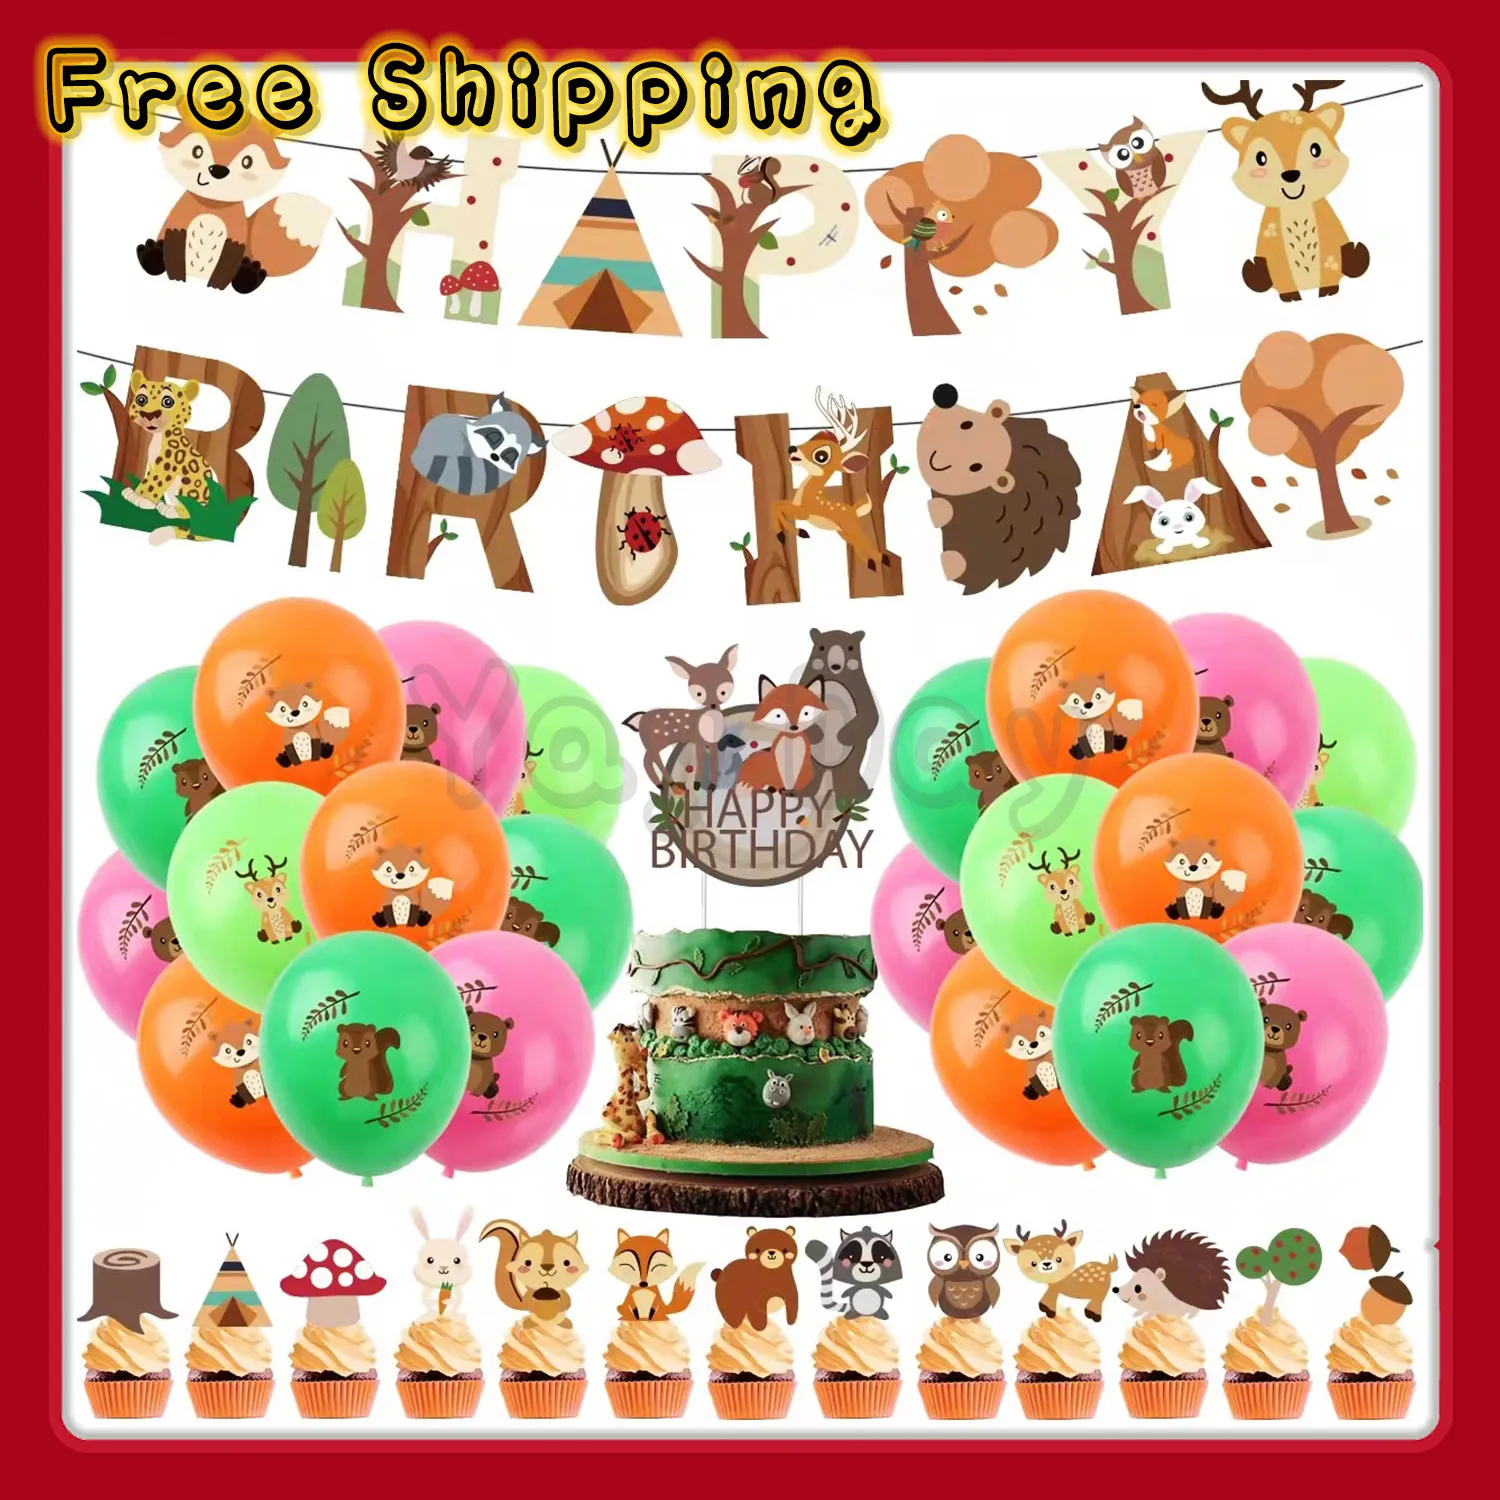 Same-day shipping] ⭐️35 pc Premium Jungle Safari Theme Birthday Party  Decorations Set Banner Balloons Cake Topper Party Supplies Kids Birthday  Party Needs | Lazada PH